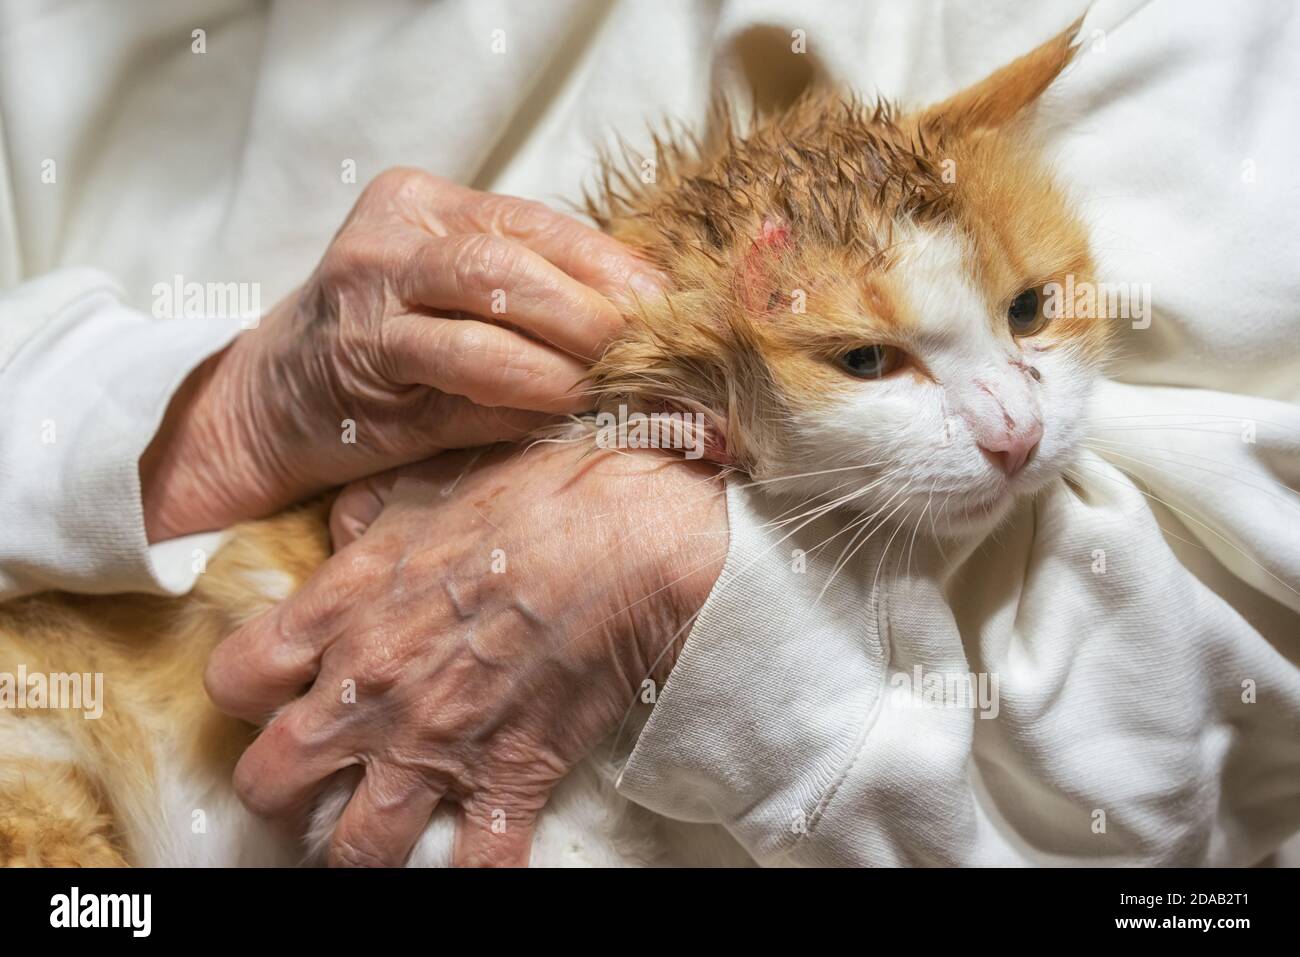 Wounded cat sits on hands after a fight with a dog with wounds on the head. Stock Photo